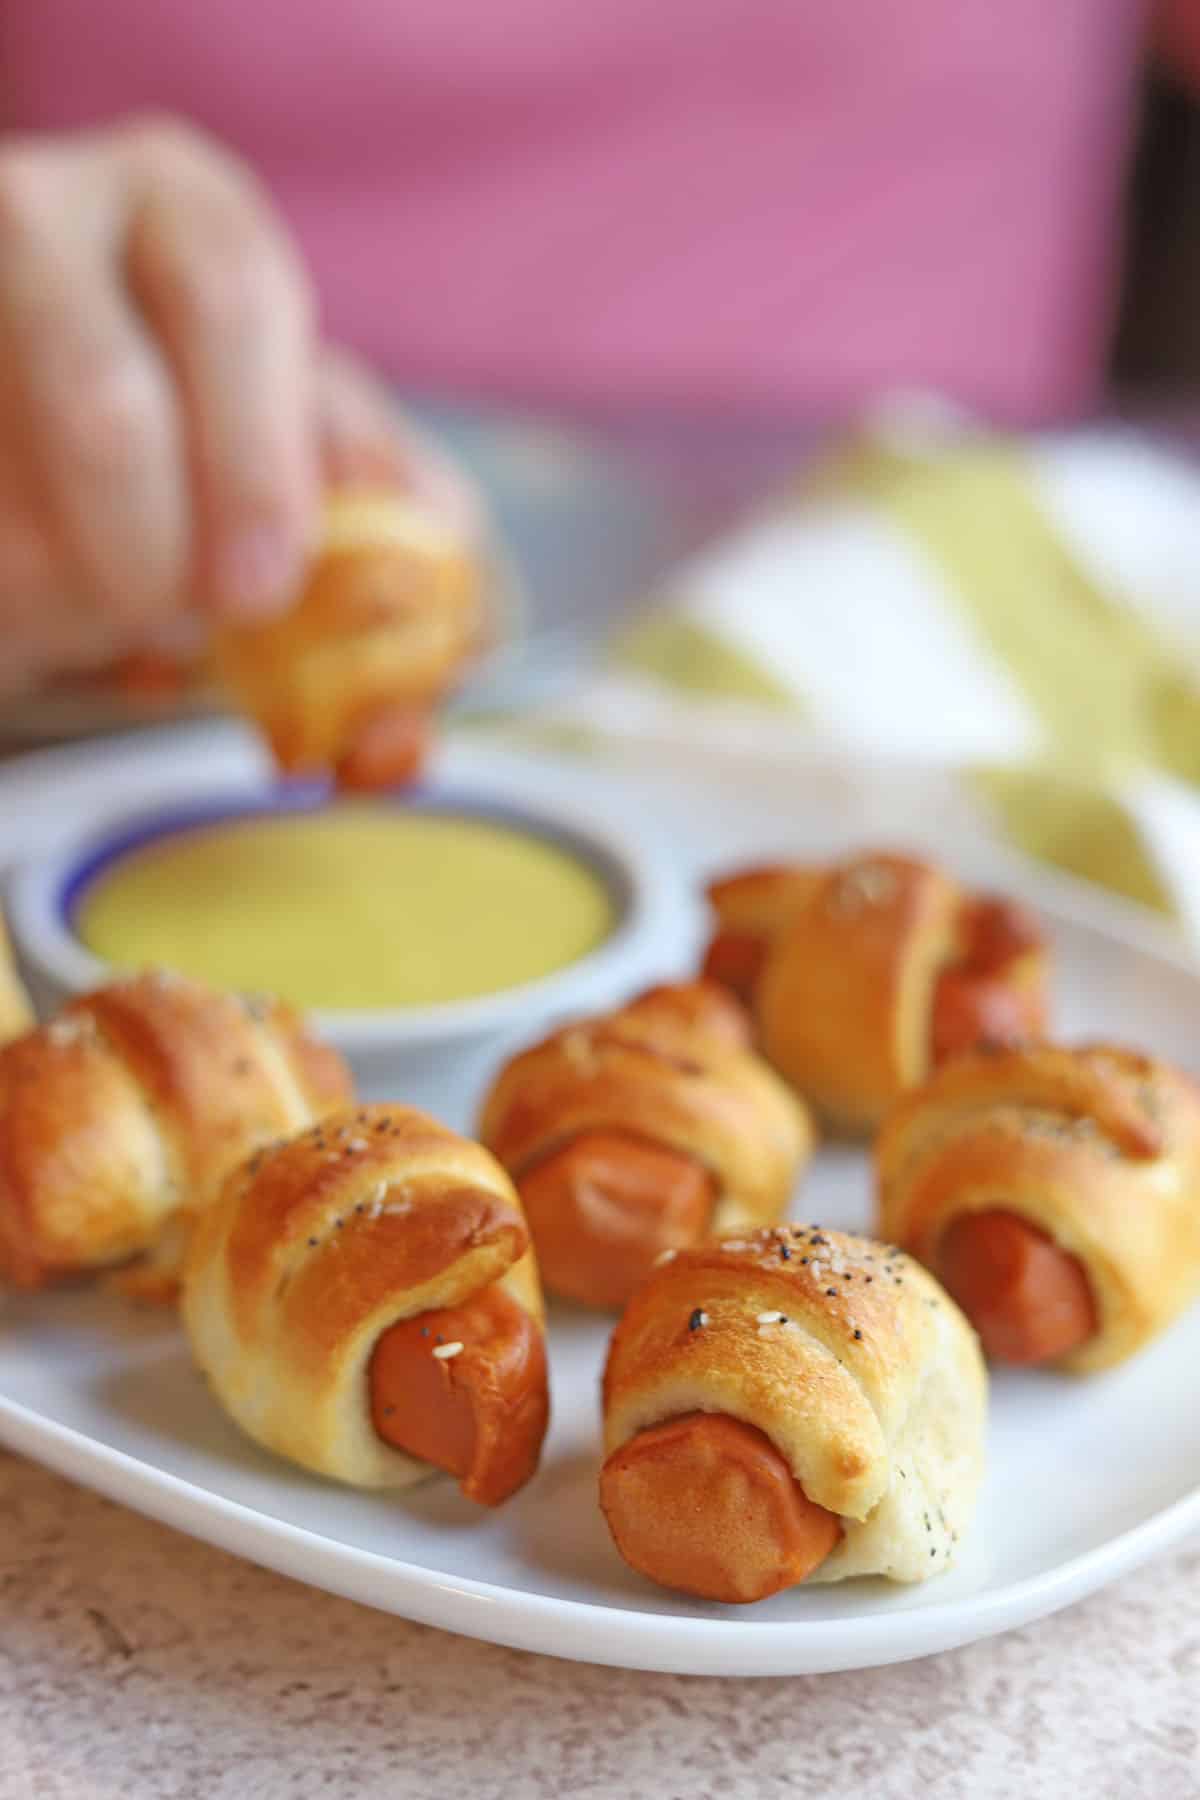 Platter of vegan pigs in a blanket with dipping sauce in background.